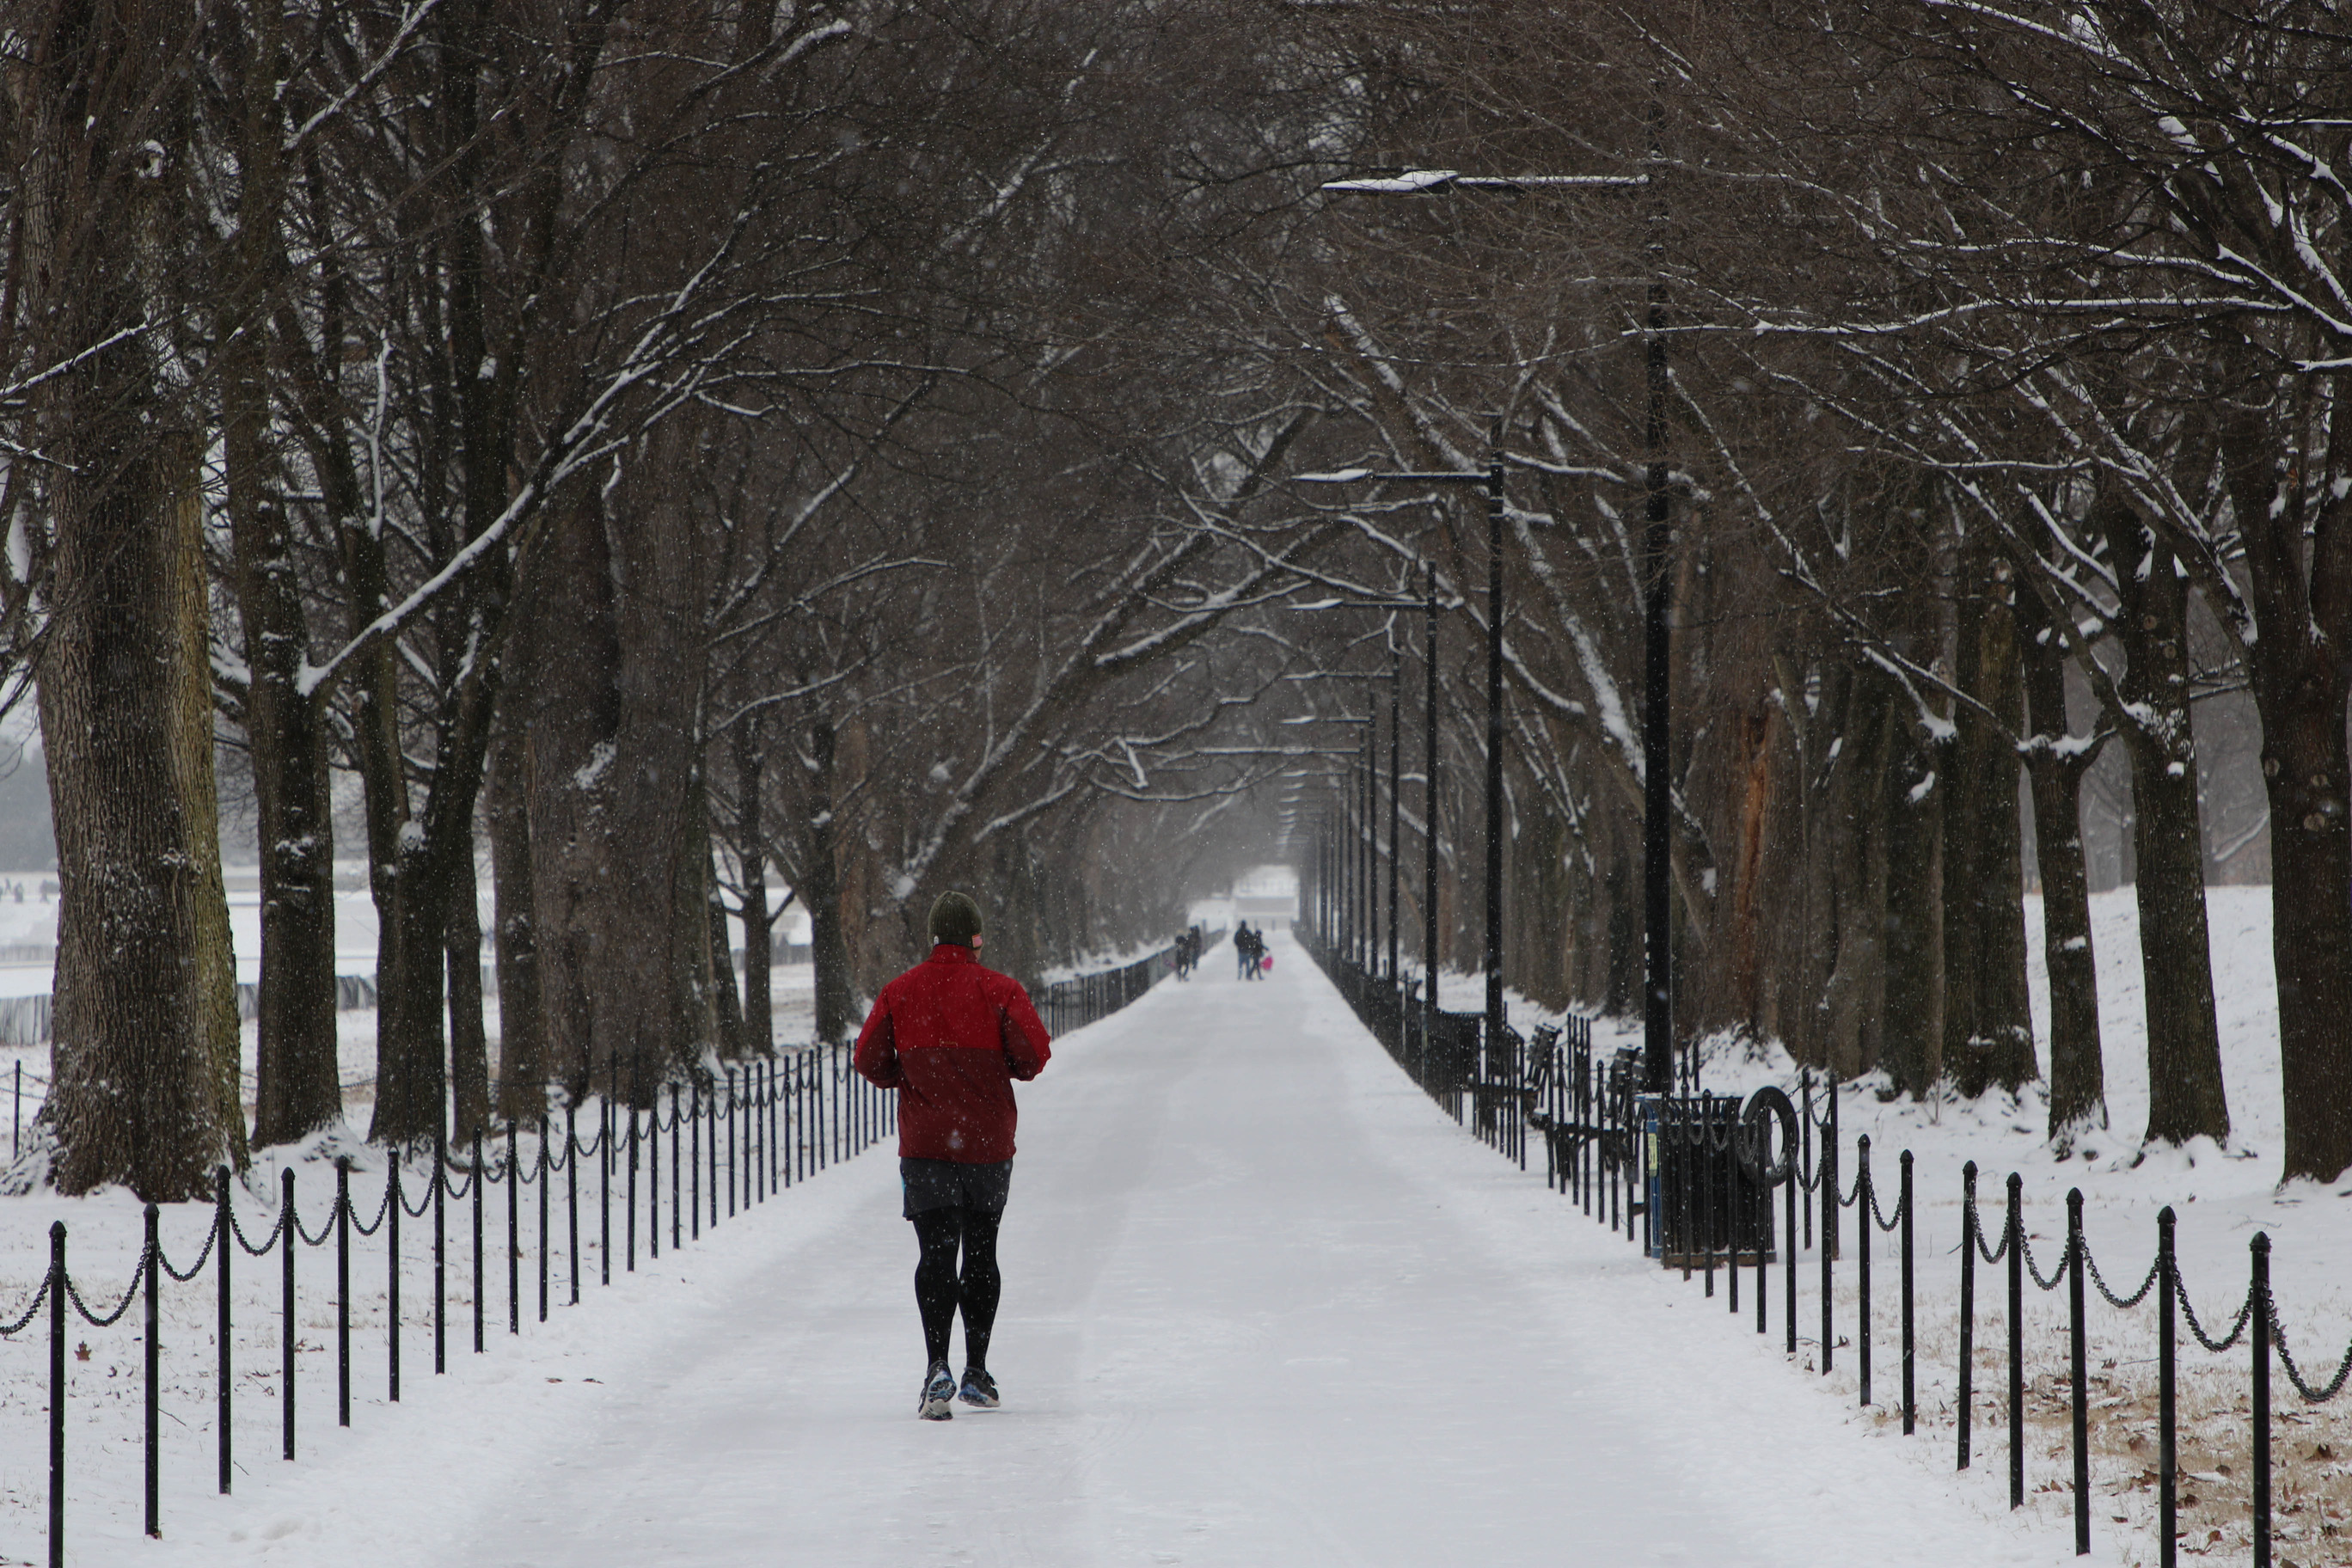 Runner on snow-covered trail lines with trees